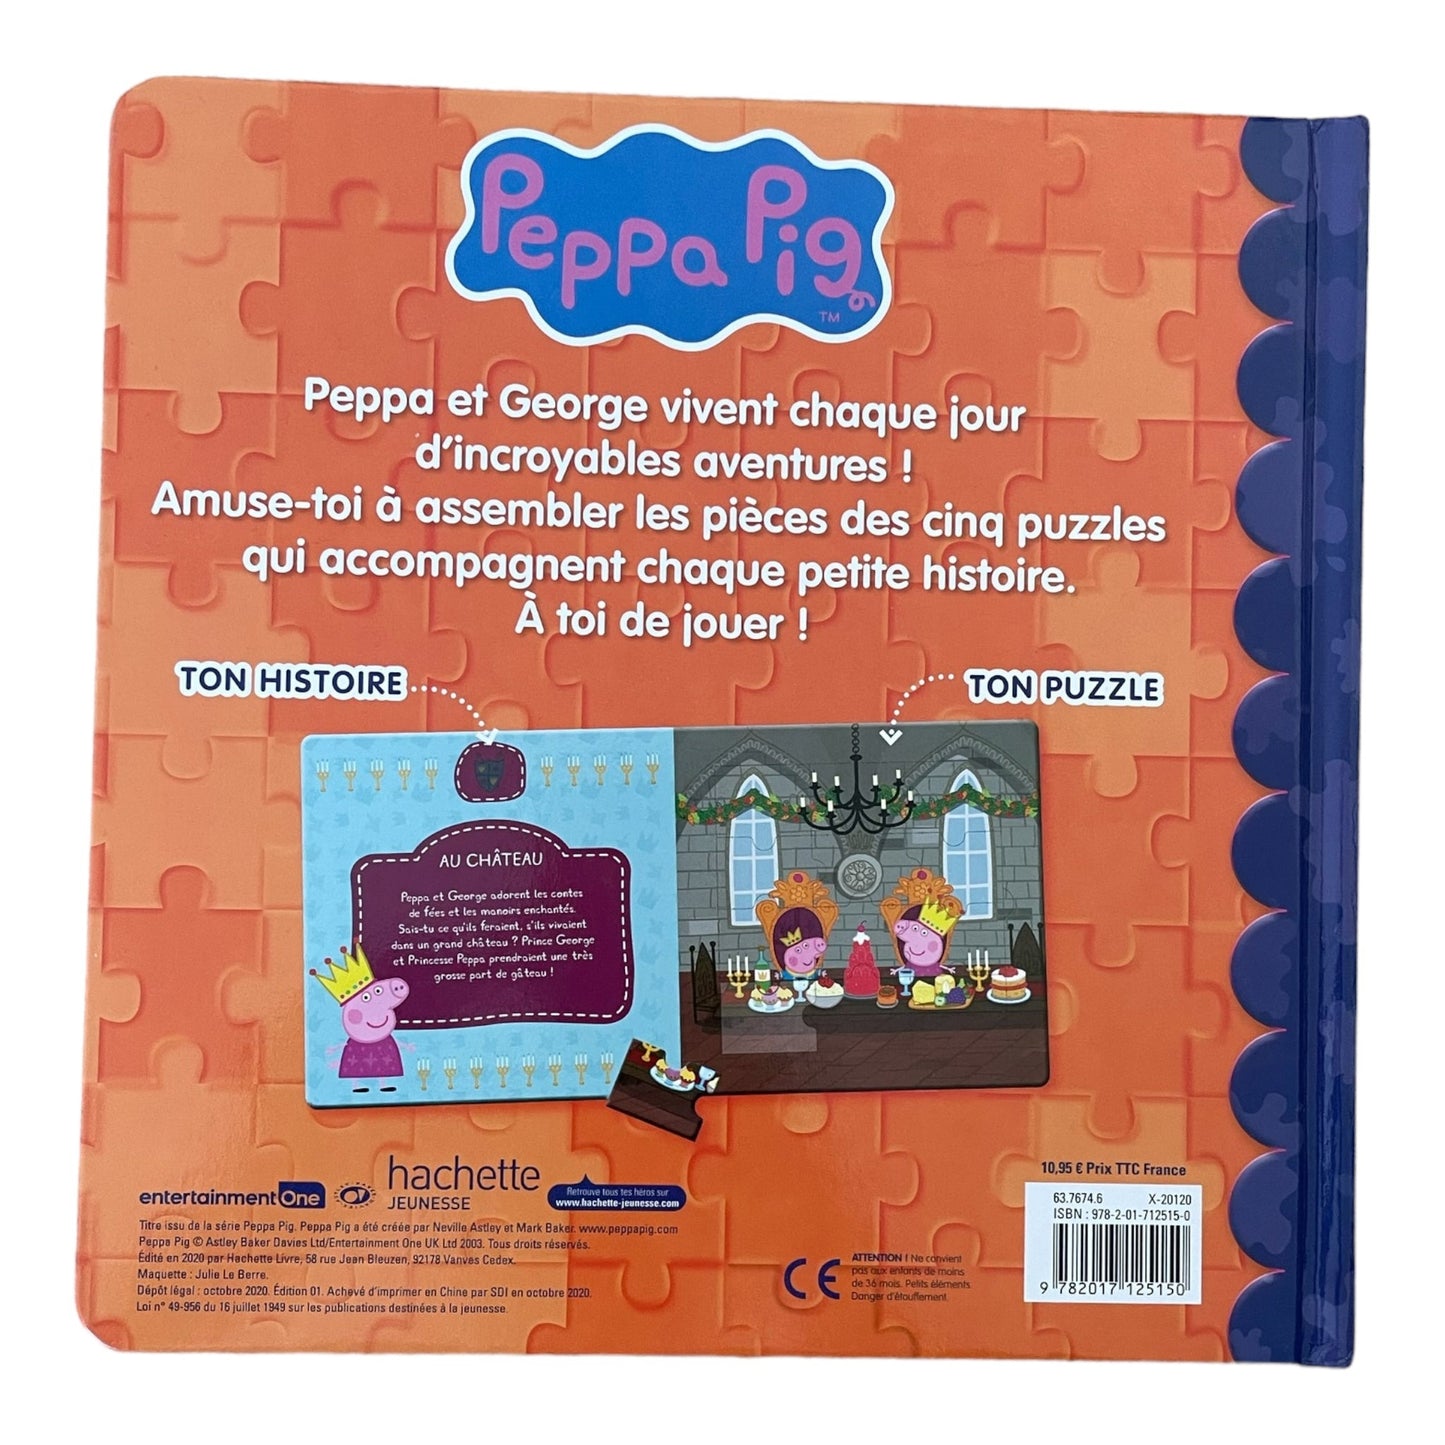 Peppa Pig - My lovely puzzle book - 5 Puzzles - 12 pieces